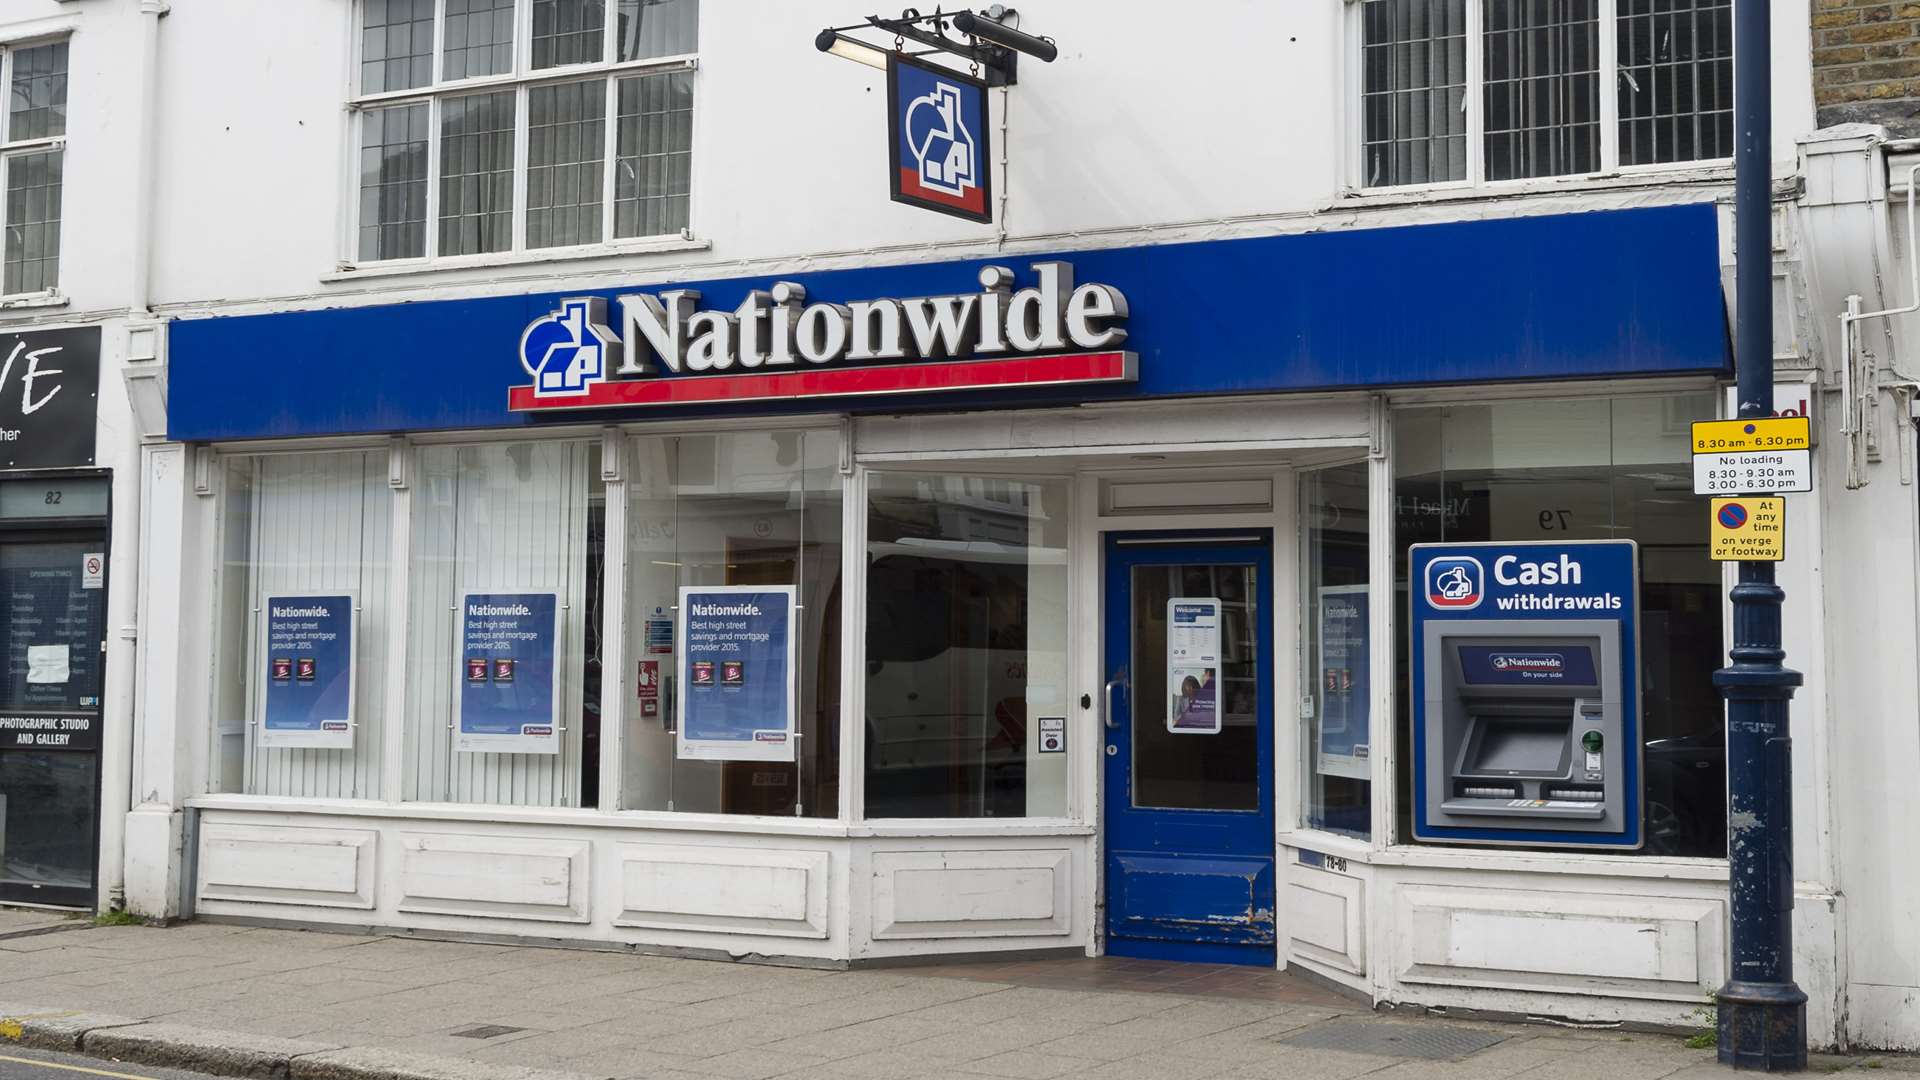 Nationwide in Whitstable